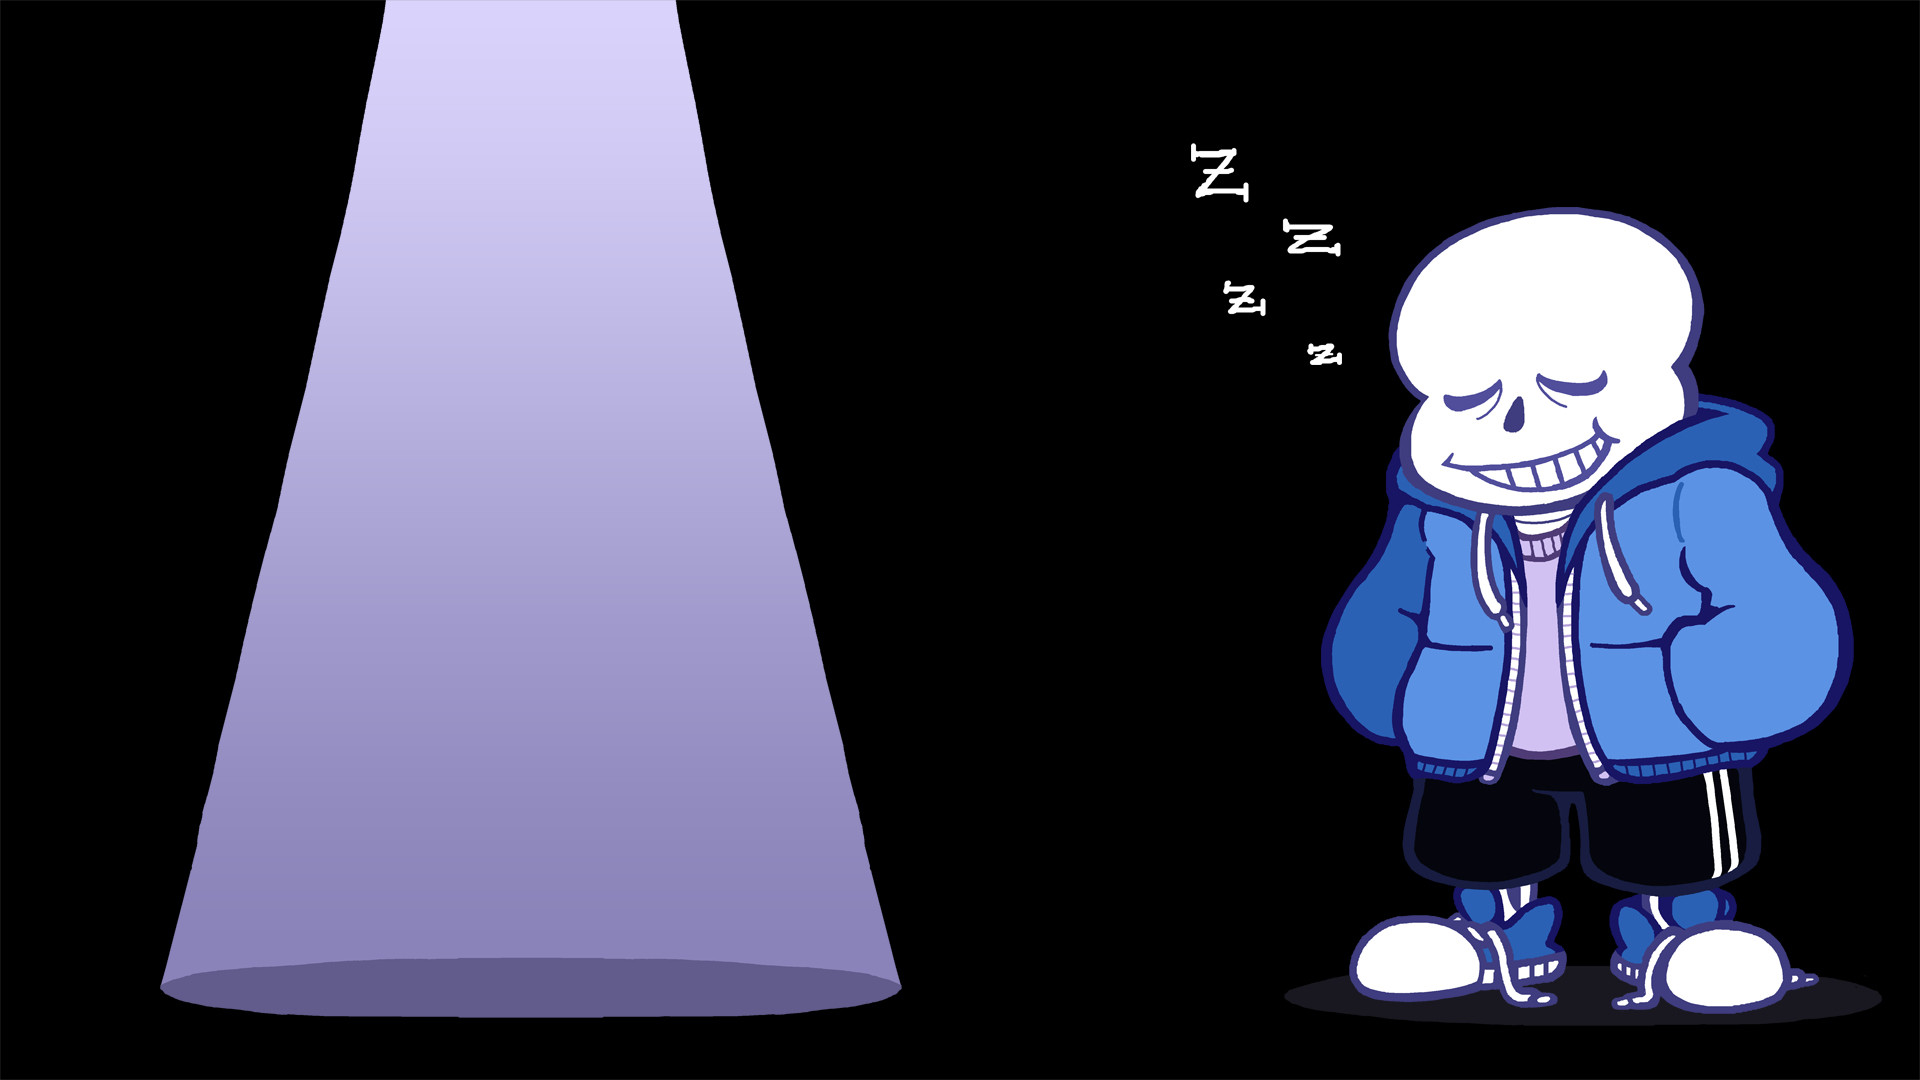 1920x1080 UNDERTALE-The Game images Sans Wallpaper HD wallpaper and background photos